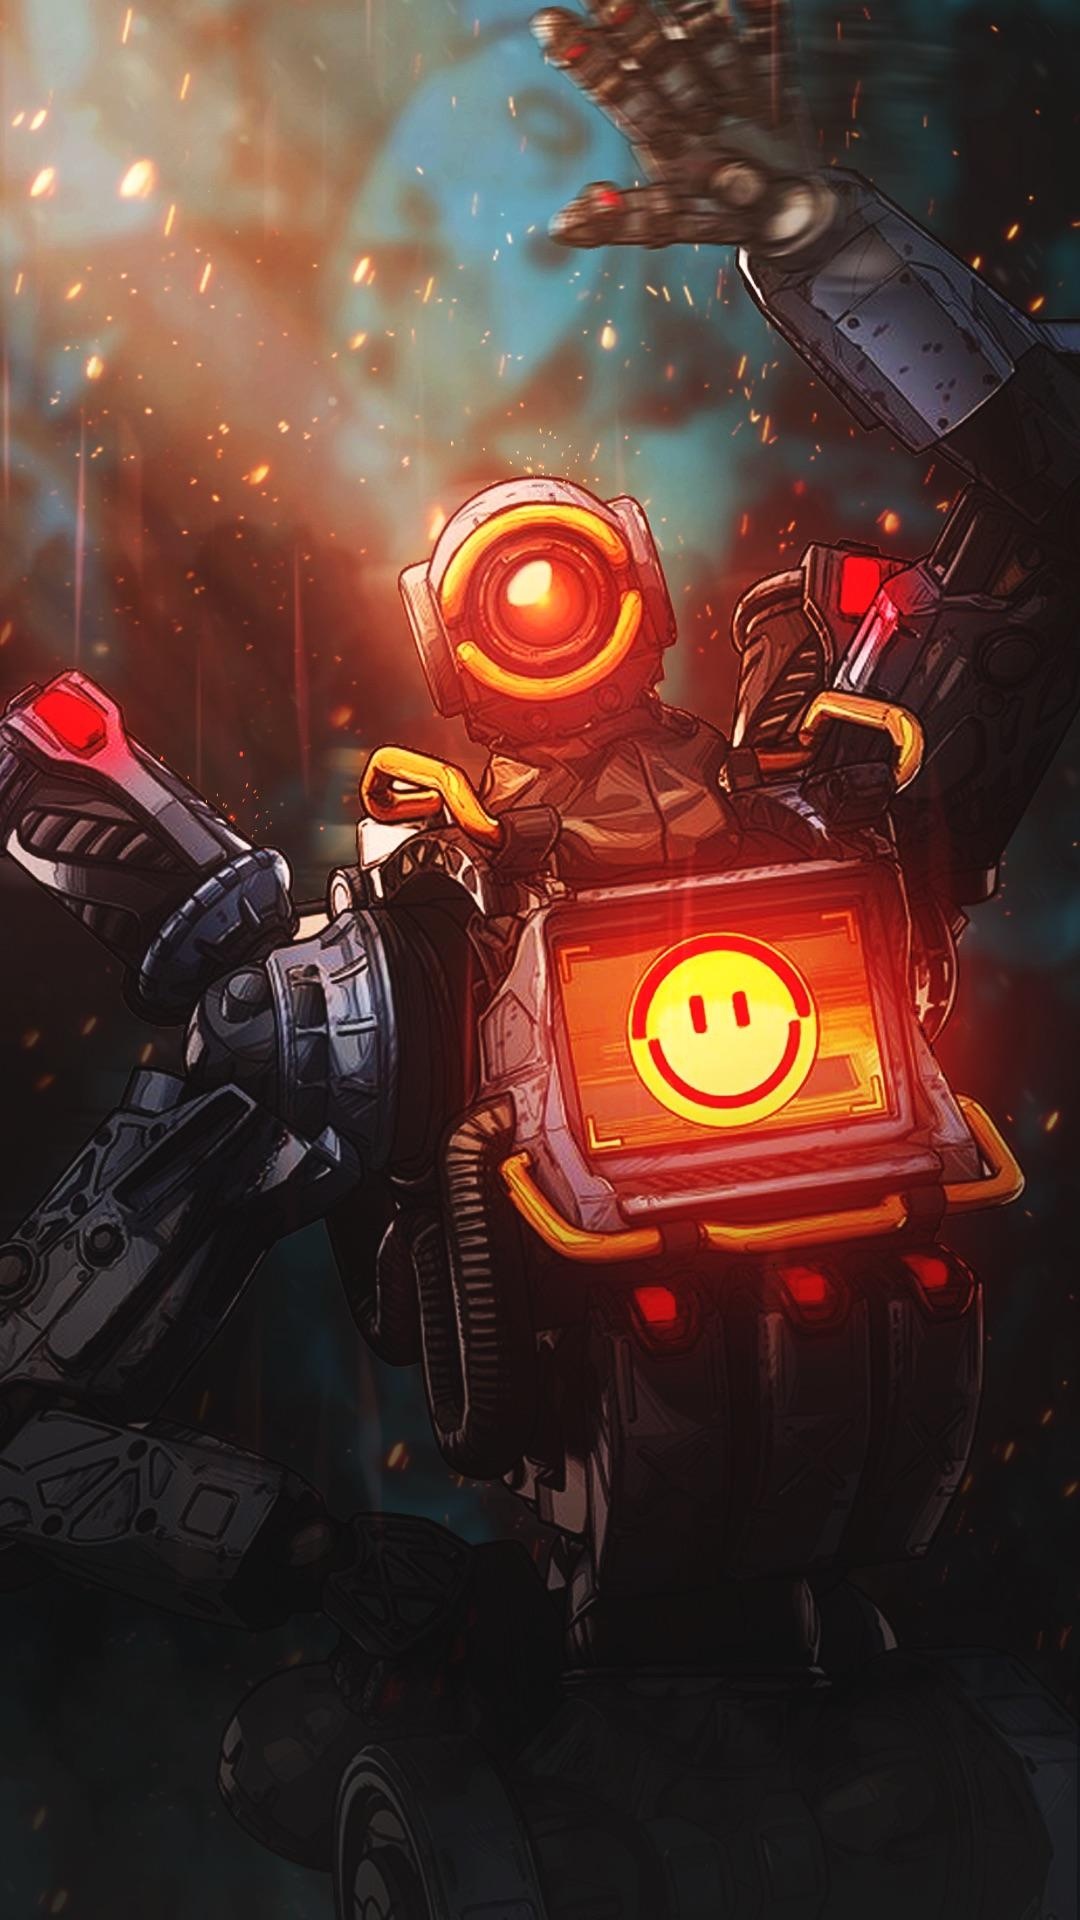 Apex Legends: Forward Scout, MRVN "Pathfinder", A Recon-Type. 1080x1920 Full HD Wallpaper.